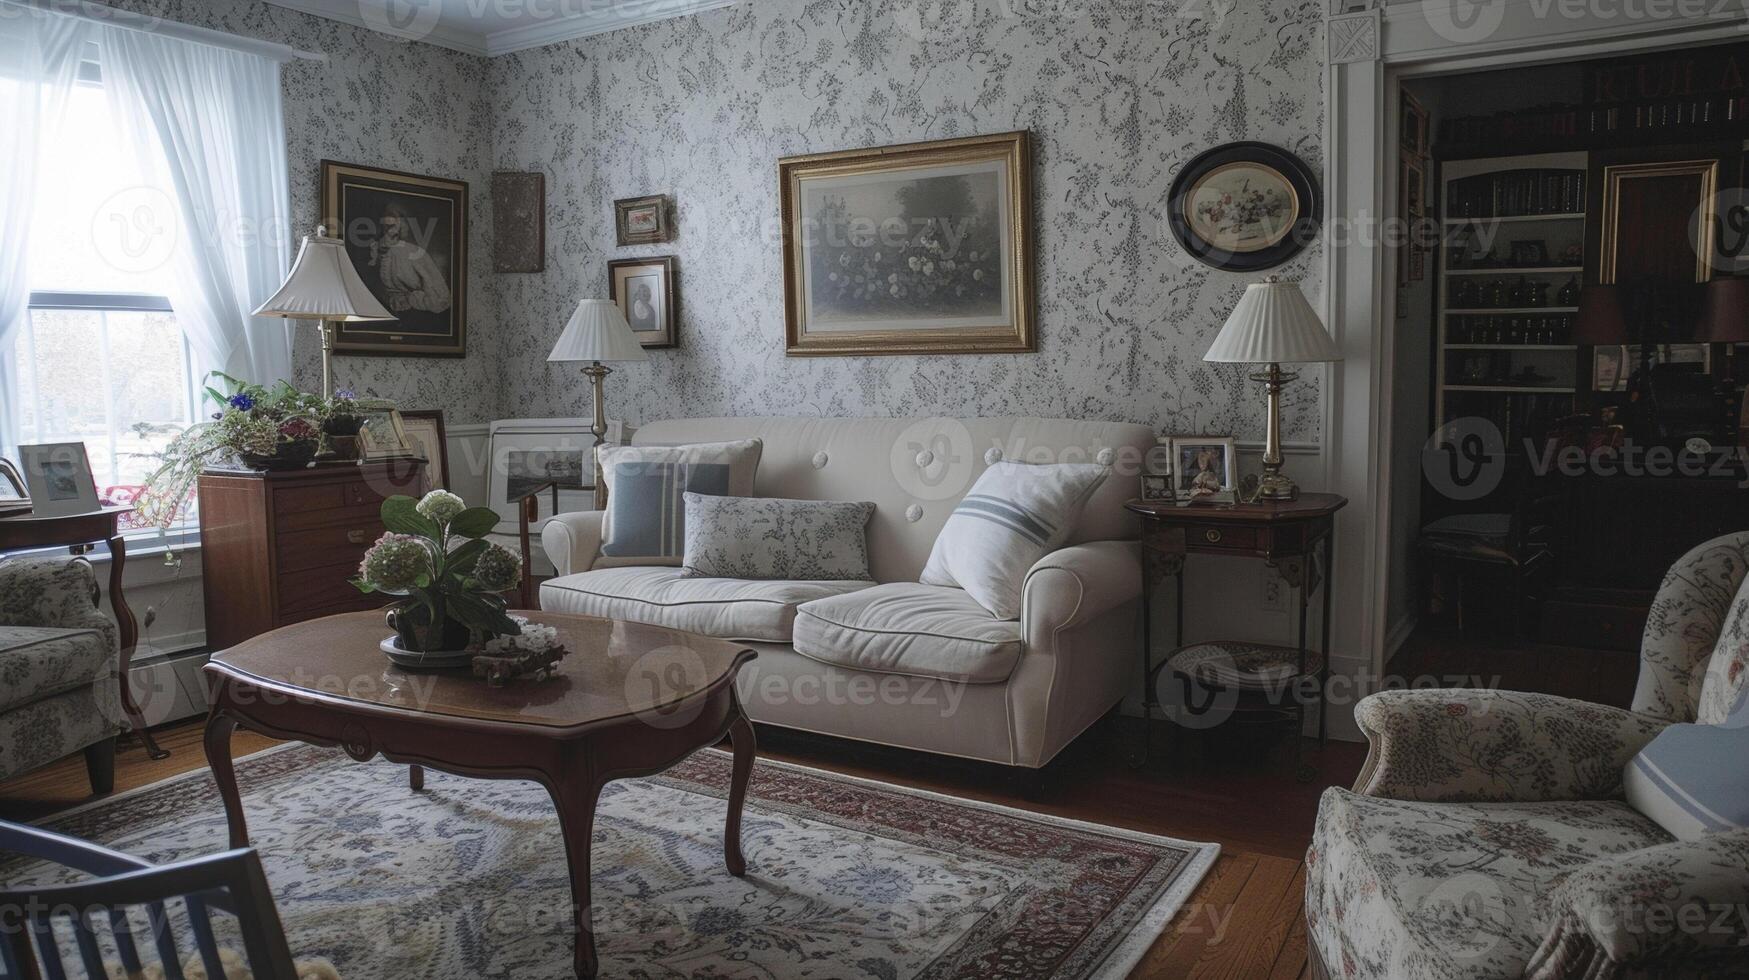 A plain and cramped living room with dated wallpaper and worn carpeting transformed into a cozy and elegant space. The DIY project includes removing the wallpaper repaintin photo